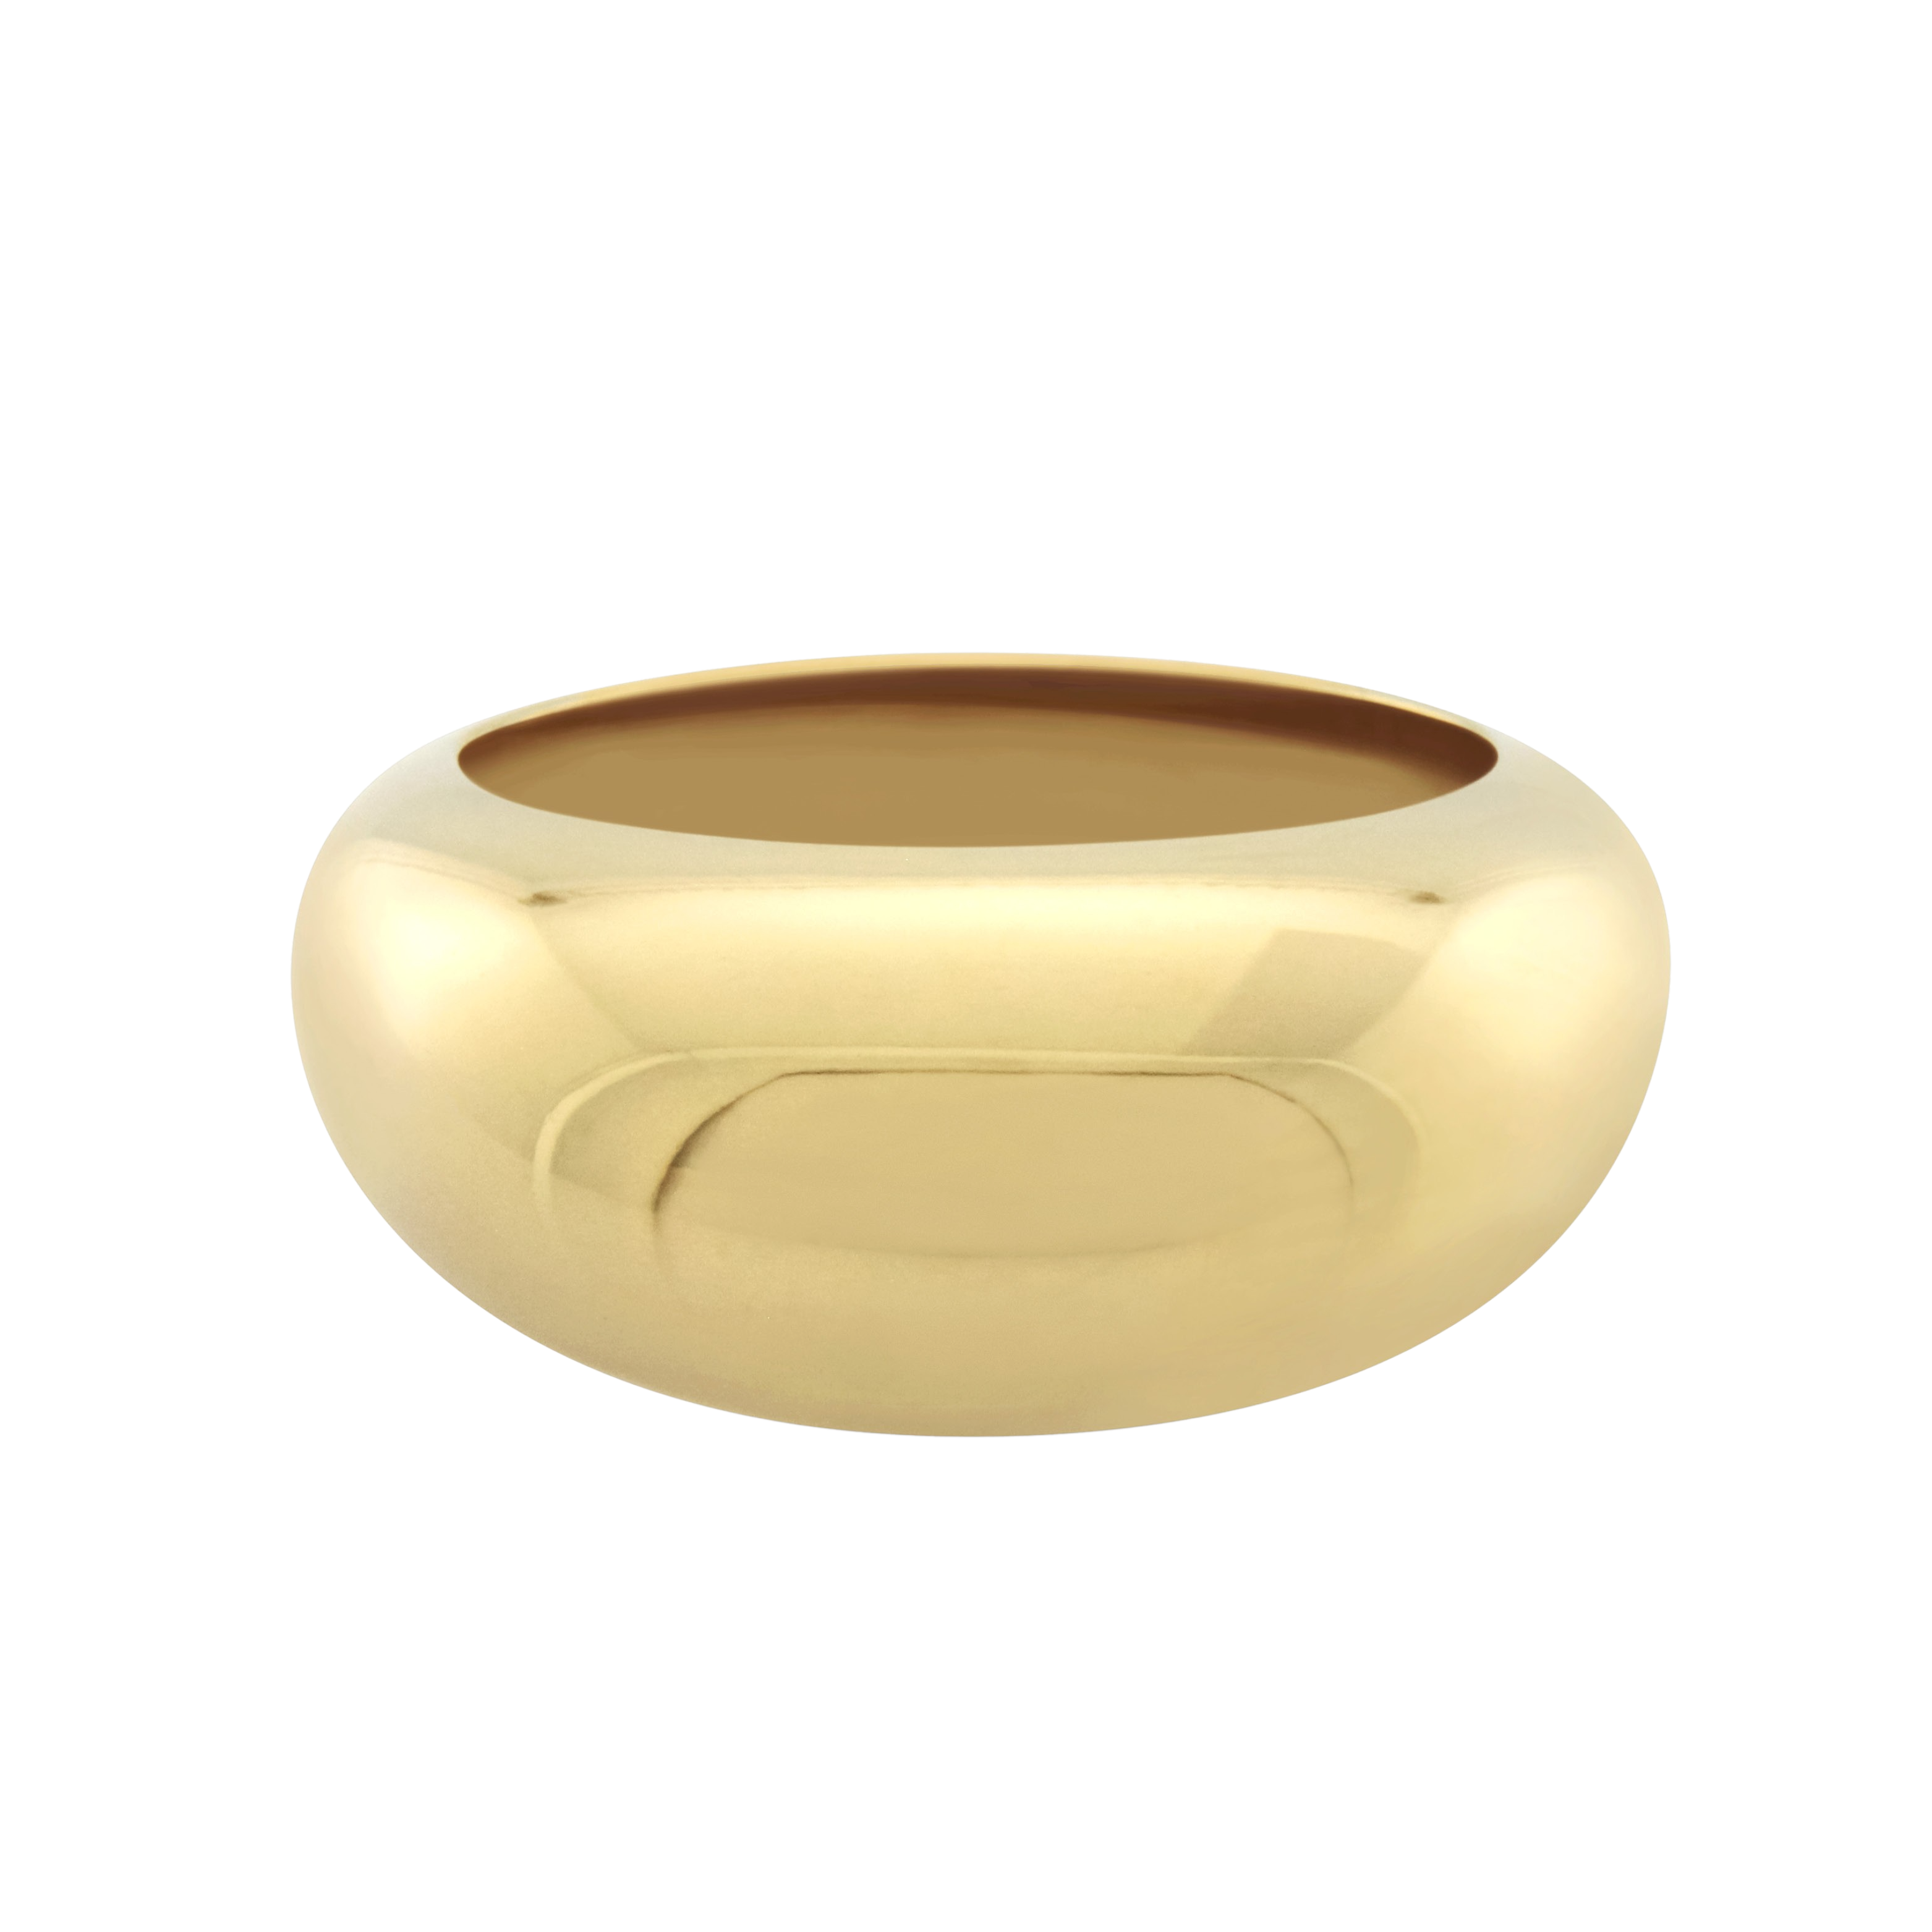 Courbure_Ring__Gold_Vermeil_Web_Shop-removebg.png